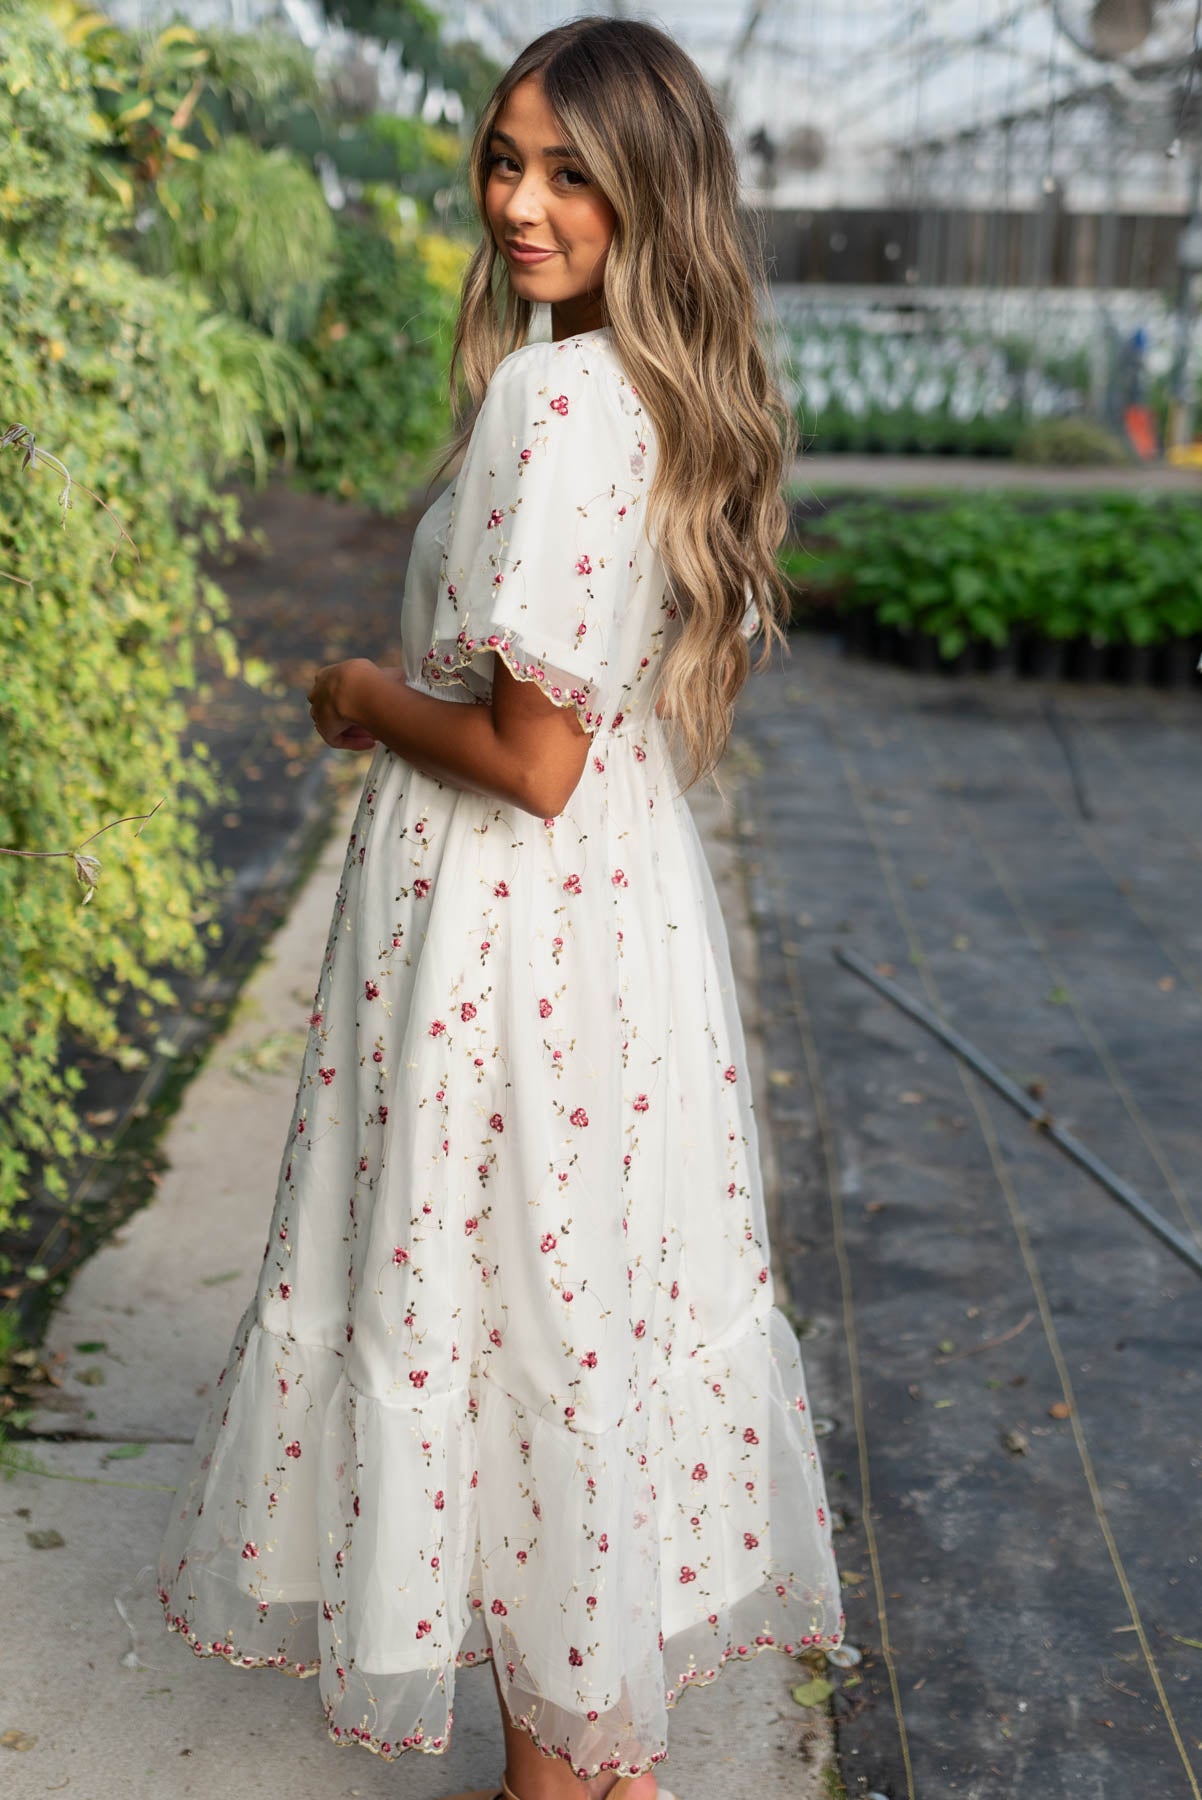 Side view of the ivory embroidered floral dress